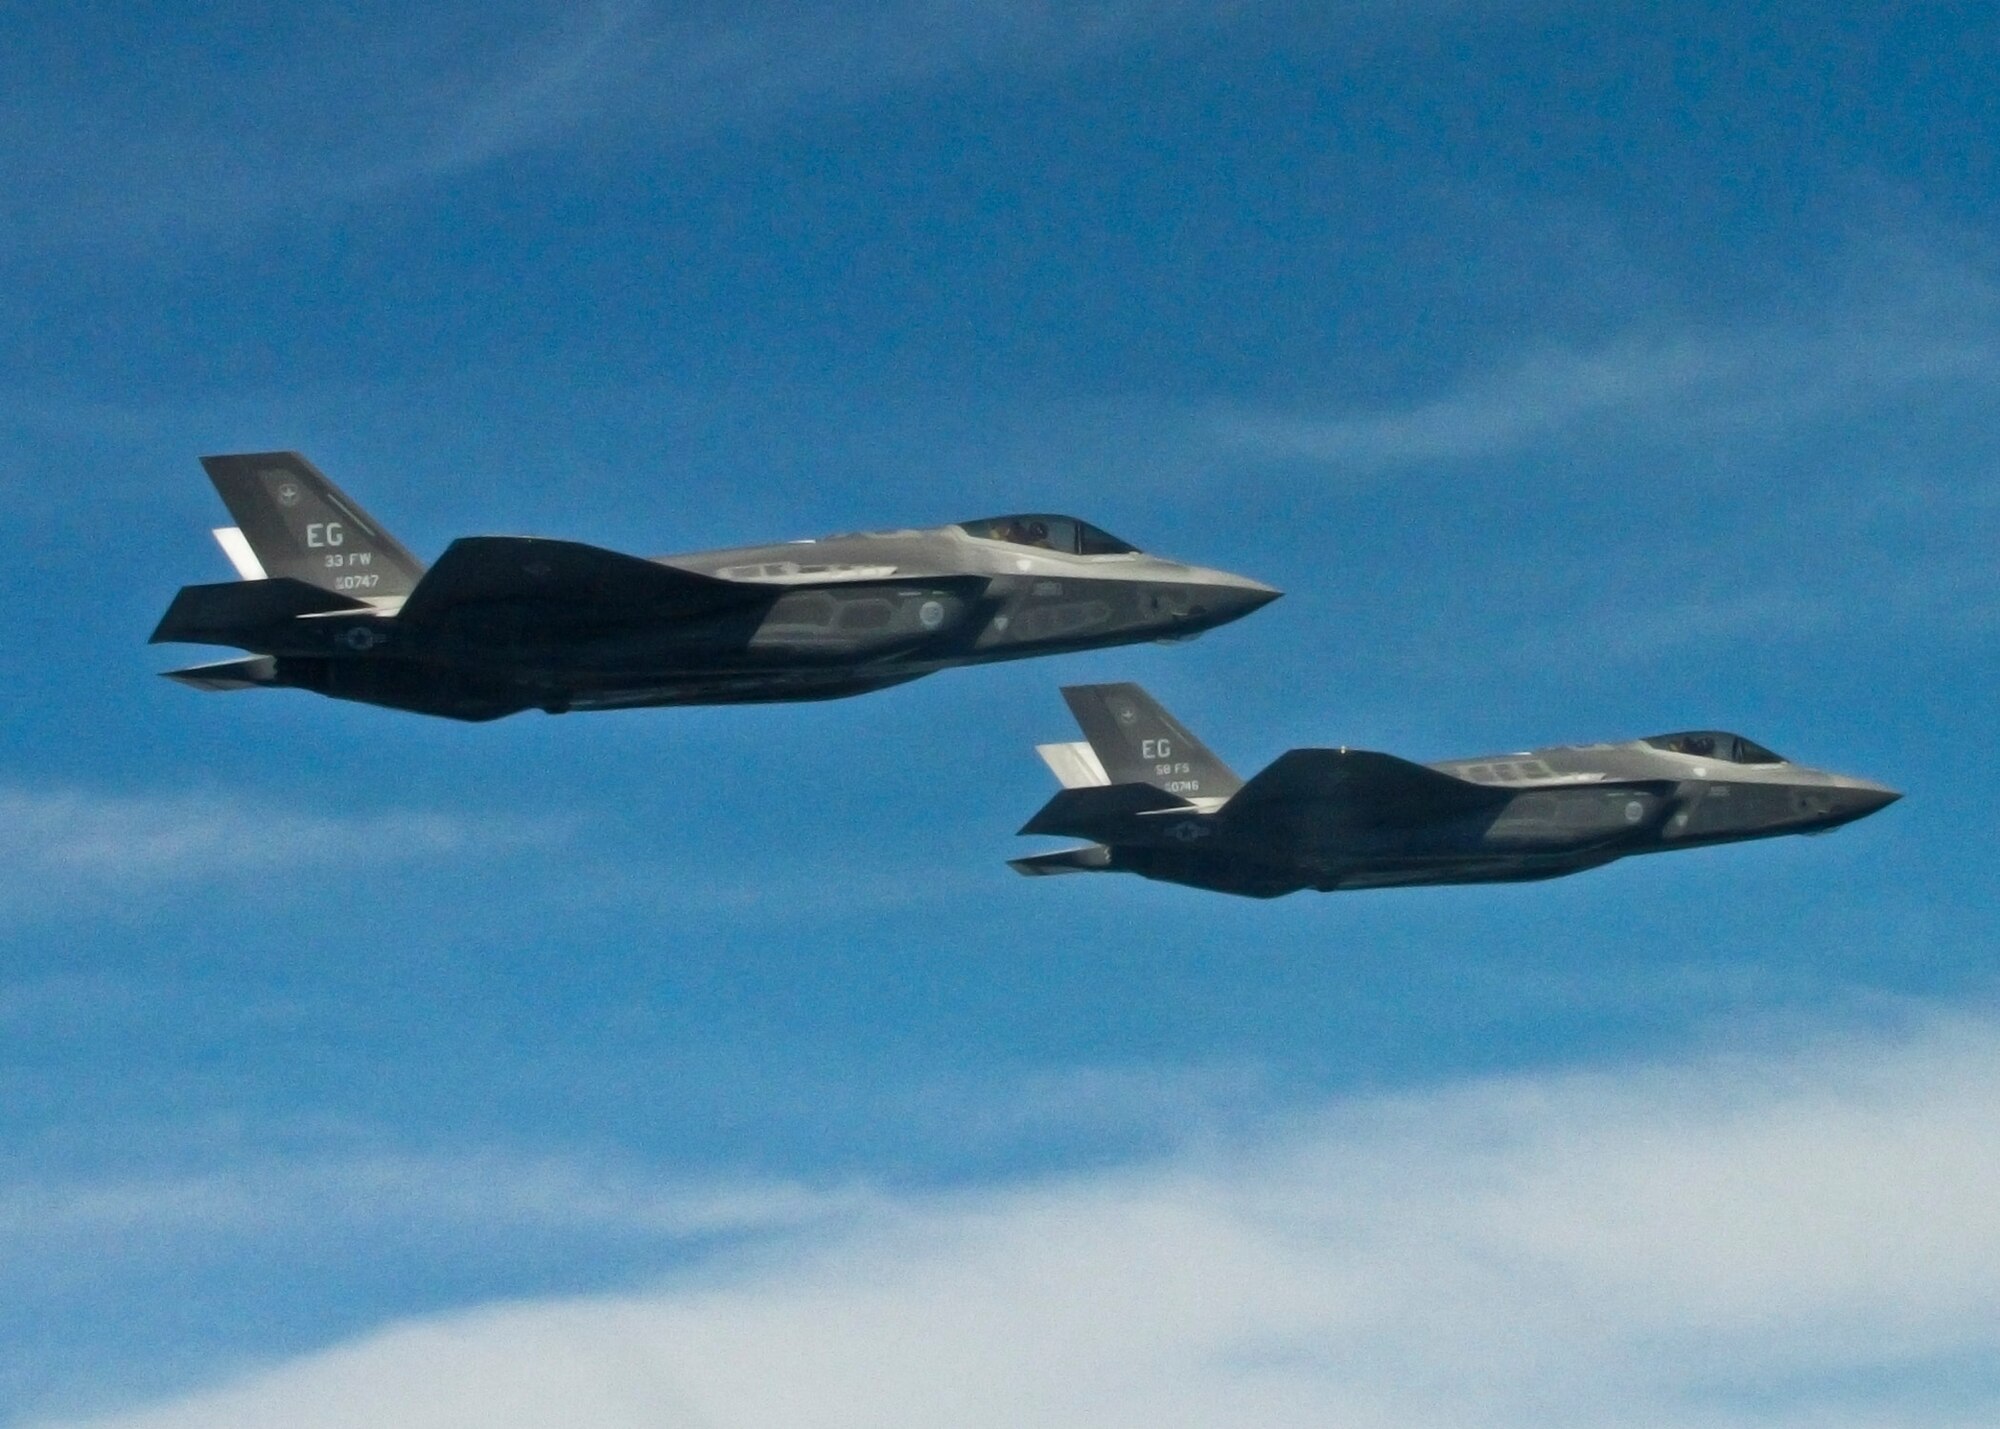 Two F-35A Lightning IIs from the 33rd Fighter Wing soar over Eglin Air Force Base's range during the unit’s first joint strike fighter formation flight April 10. Lt. Col. Eric Smith, 58th Fighter Squadron director of operations, flew the lead aircraft while Marine Maj Joseph Bachmann, Fighter Attack Training Squadron 501 aircraft maintenance officer, flew wingman. The pilots, both first in their service qualified to fly the 5th generation aircraft, were validating pilot syllabus objectives in preparation for future training. The 33rd FW is responsible for F-35 A/B/C pilot and maintainer training for the Marine Corps, Navy, Air Force, and in the future, at least eight coalition partners. (U.S. Air Force photo/Capt. Ryan Seymour) 
